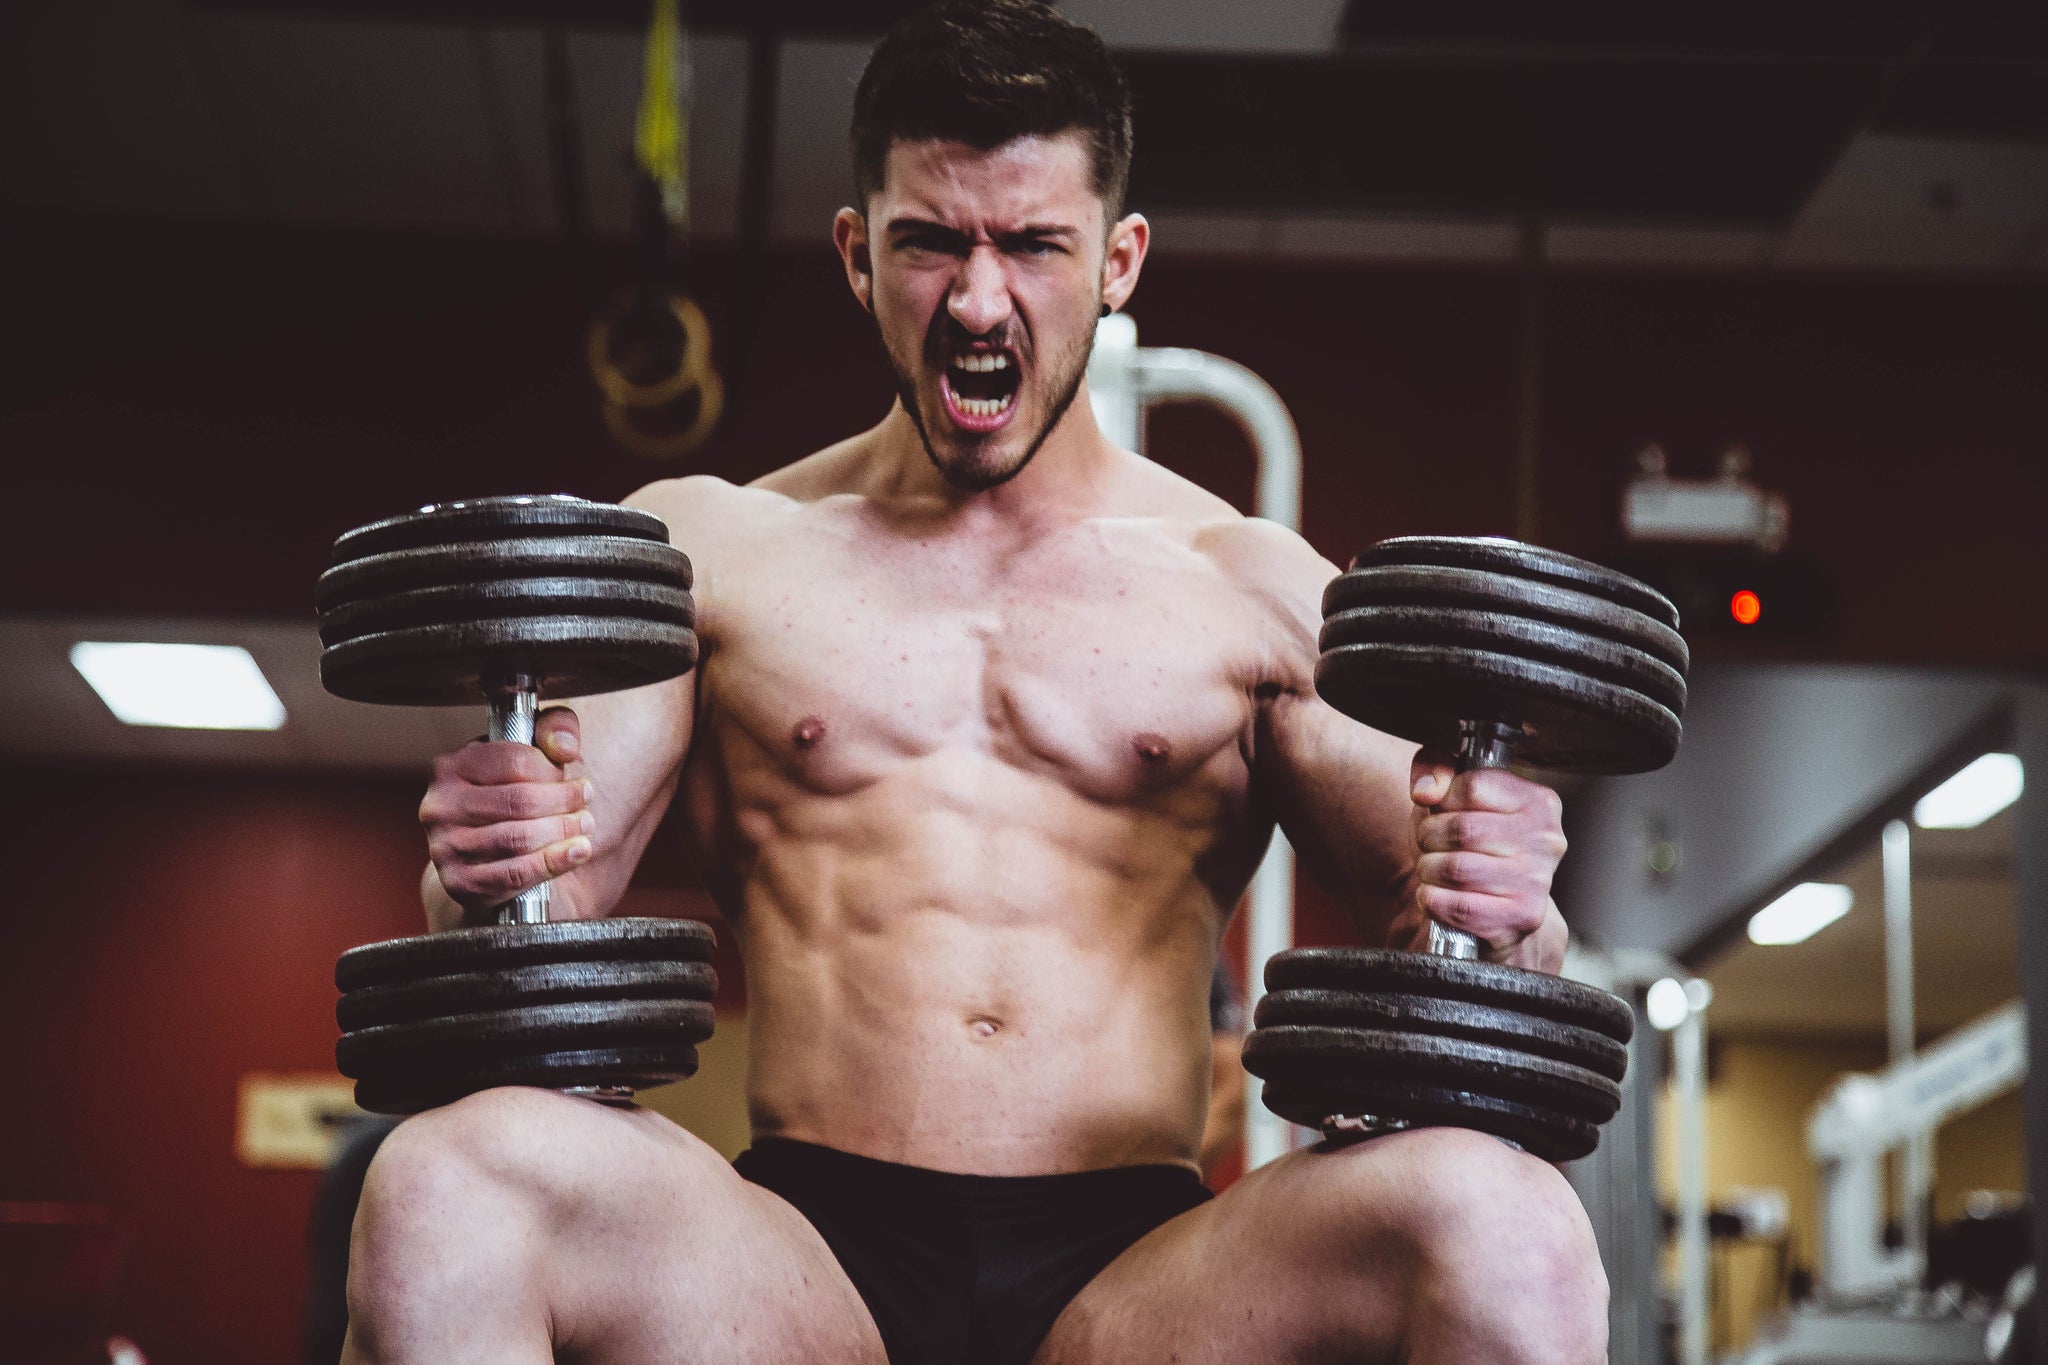 Athlete lifting weights with his mouth agape in a gym